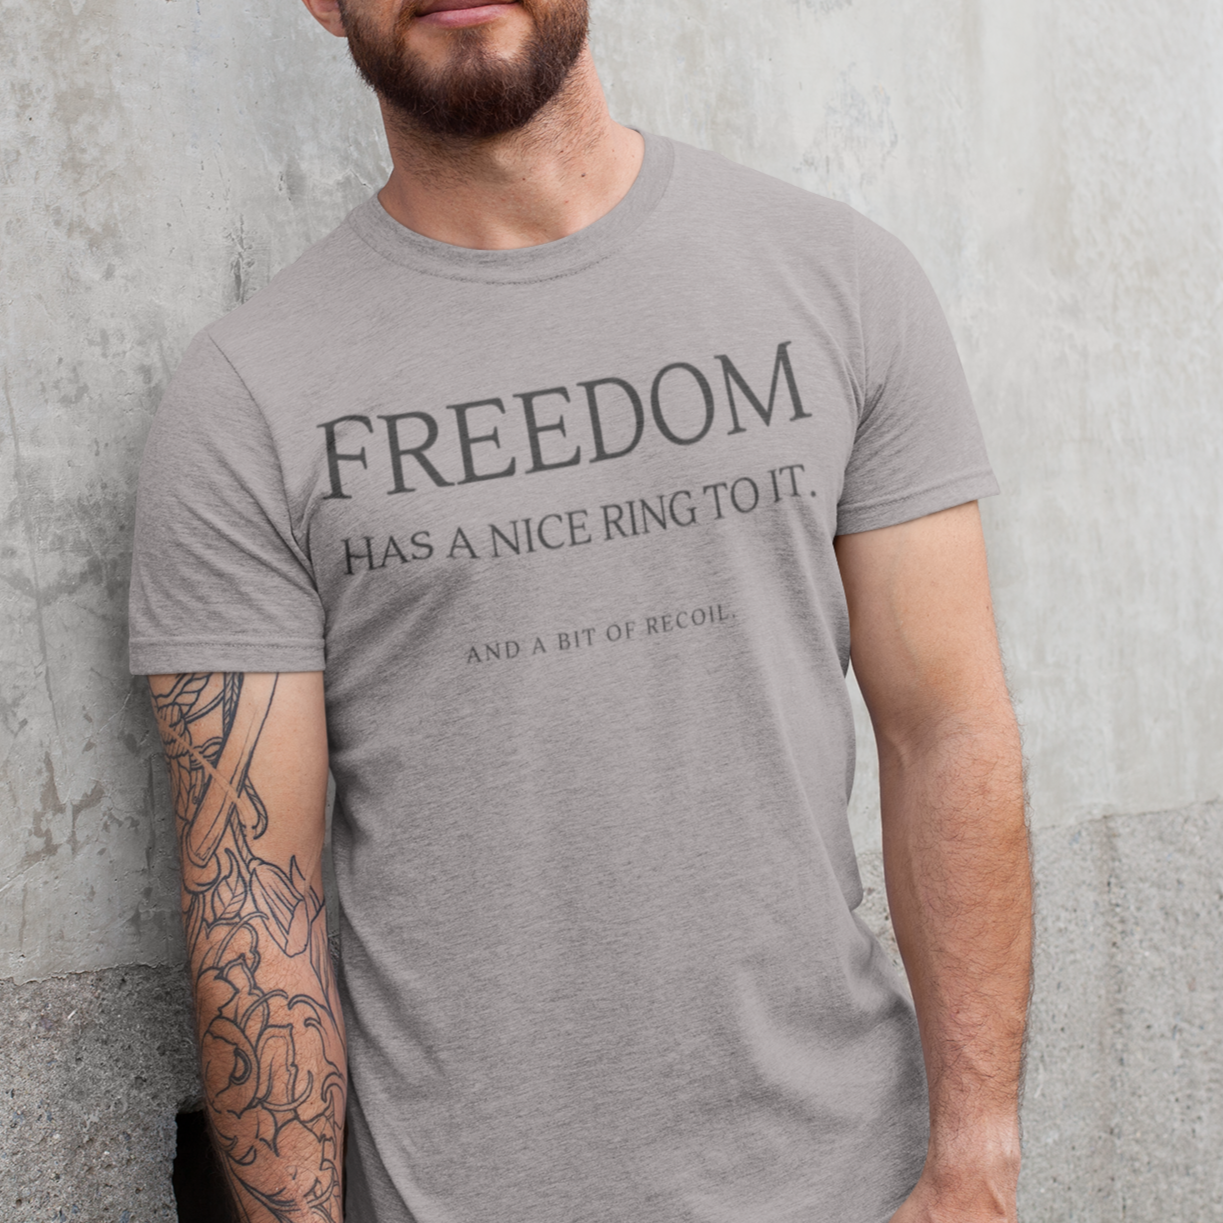 freedom-has-a-nice-ring-to-it-and-a-bit-of-recoil-athletic-heather-grey-t-shirt-2a-heathered-tee-mockup-of-a-man-leaning-against-a-concrete-wall